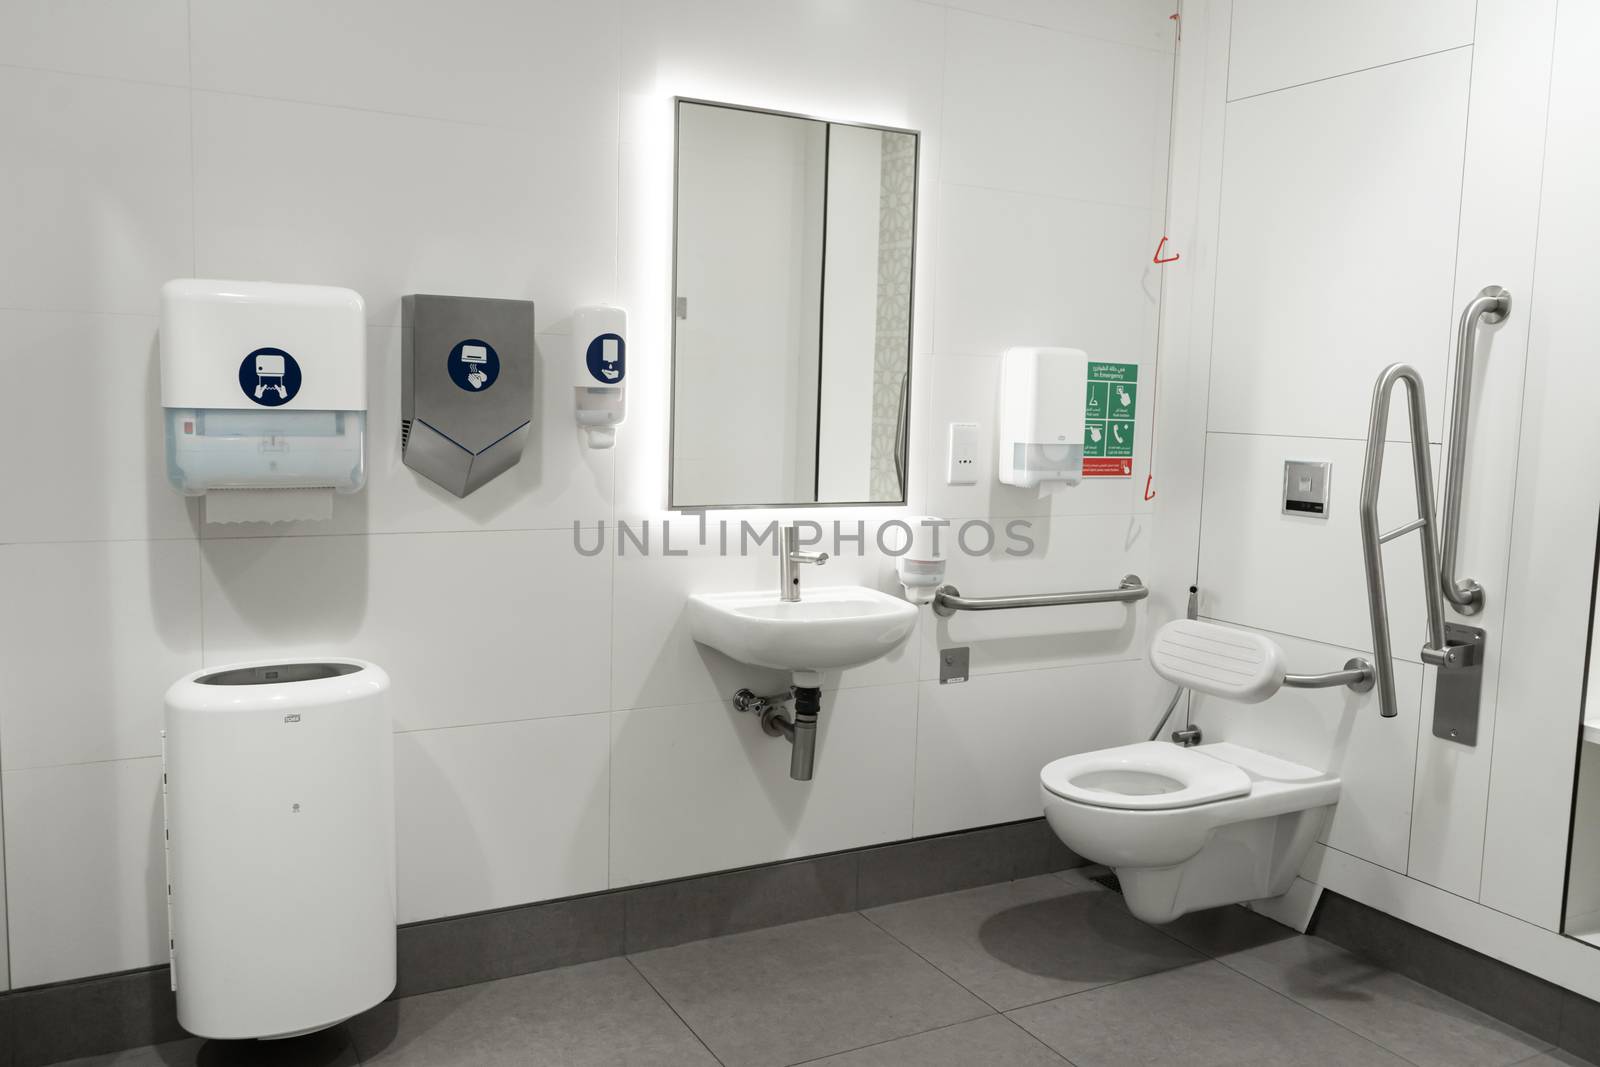 Restroom for people with disabilities in a modern country by Try_my_best